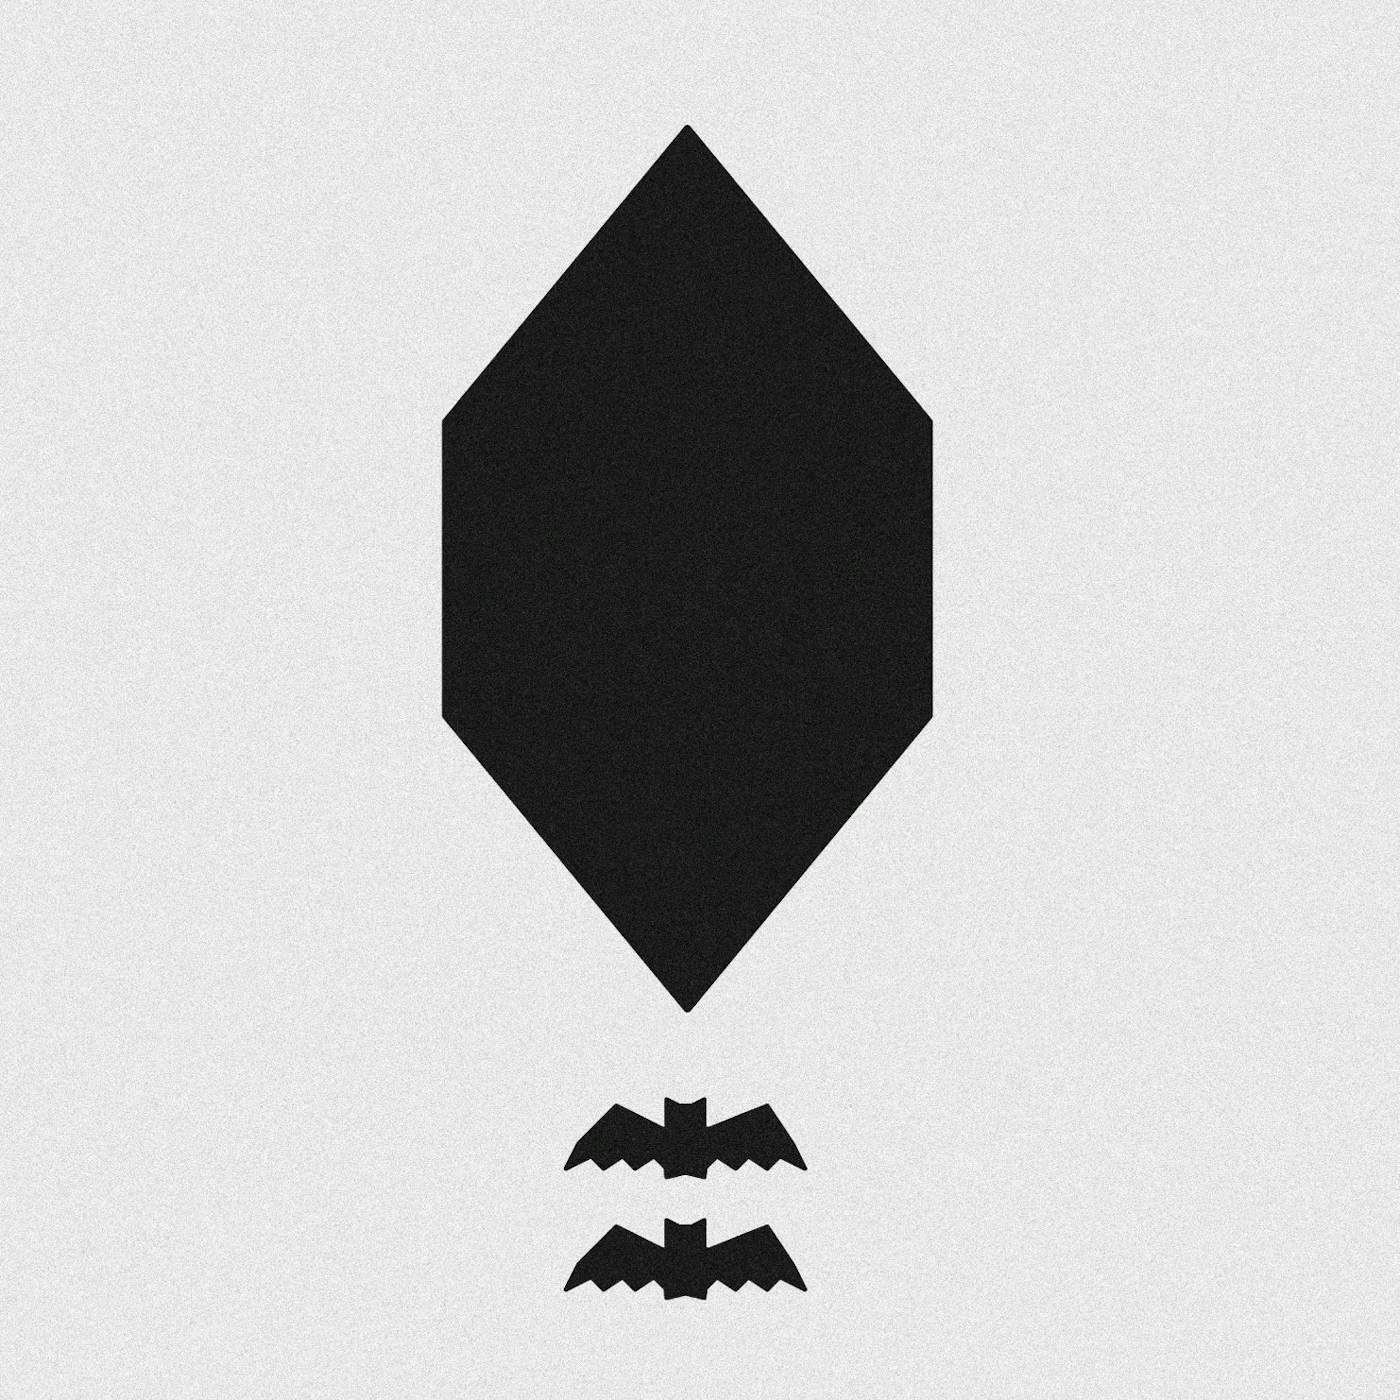 Motorpsycho 'Here Be Monsters' Vinyl Record